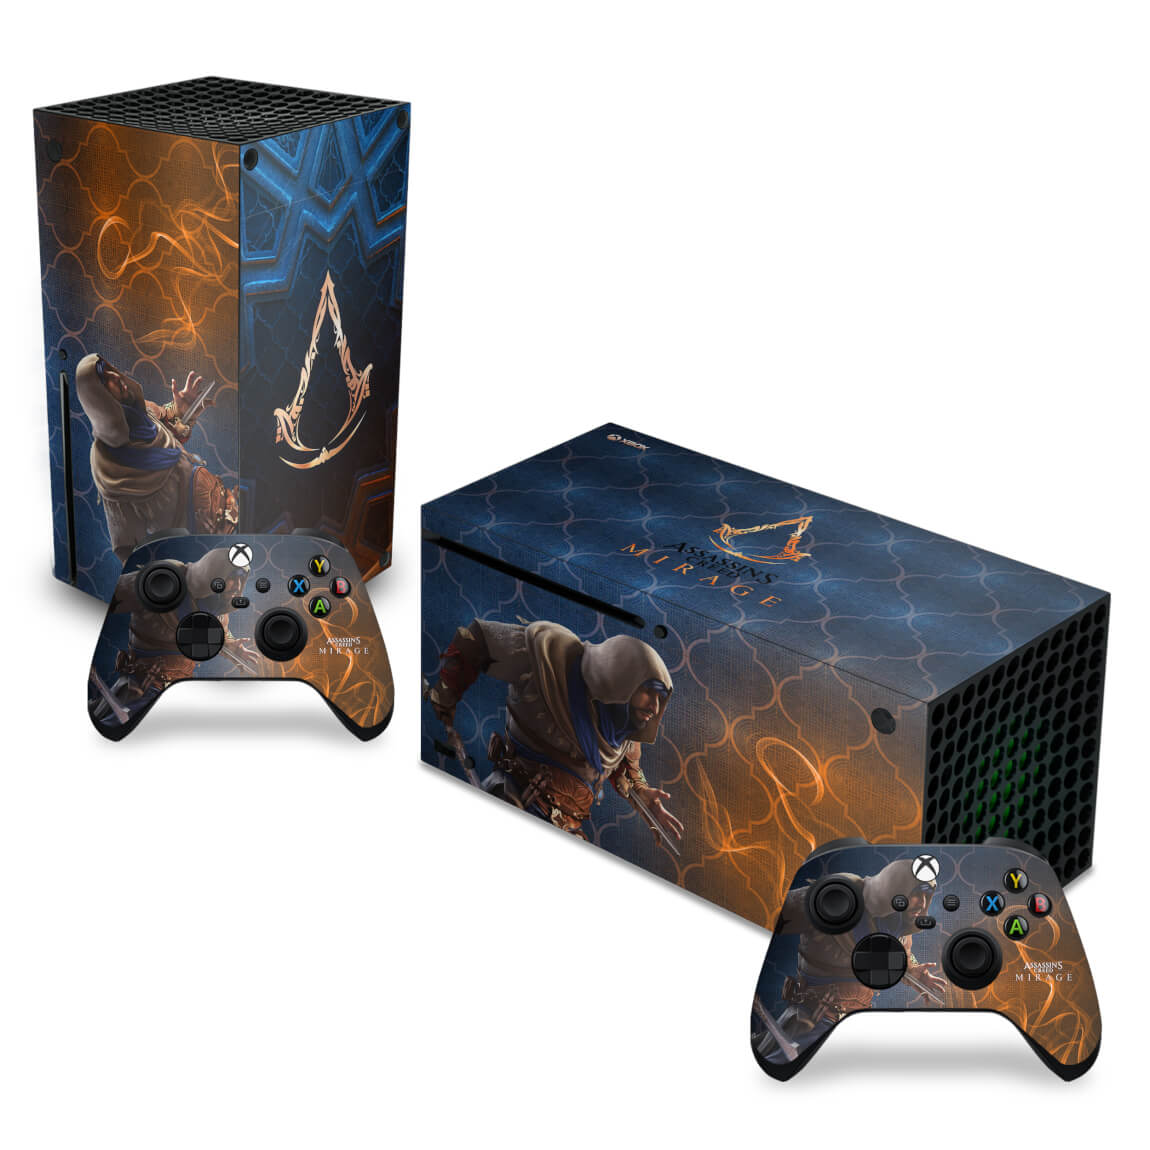 Assassin's Creed Mirage Xbox Series X/One